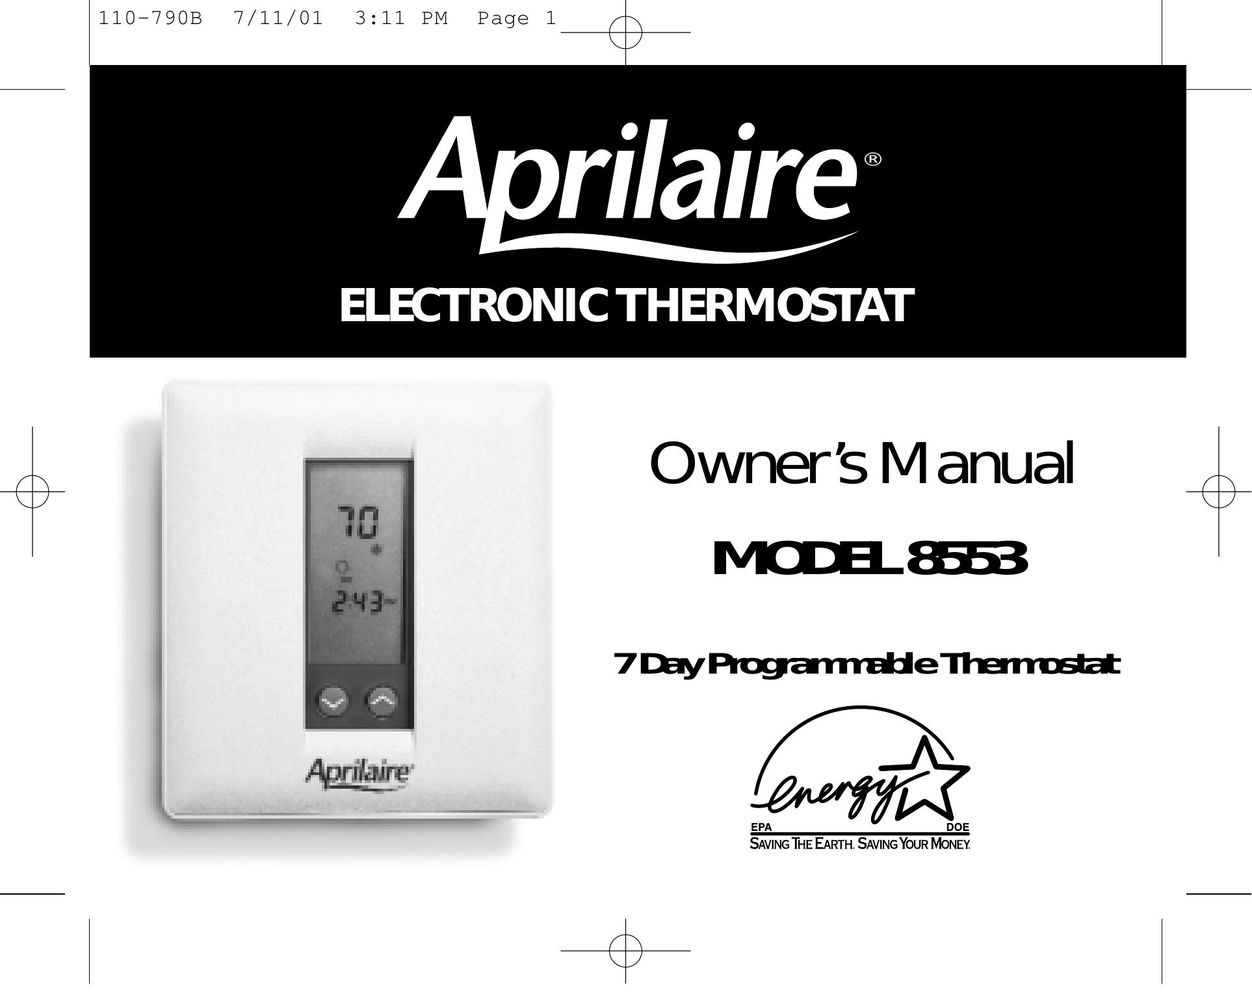 Aprilaire 8553 Thermostat User Manual